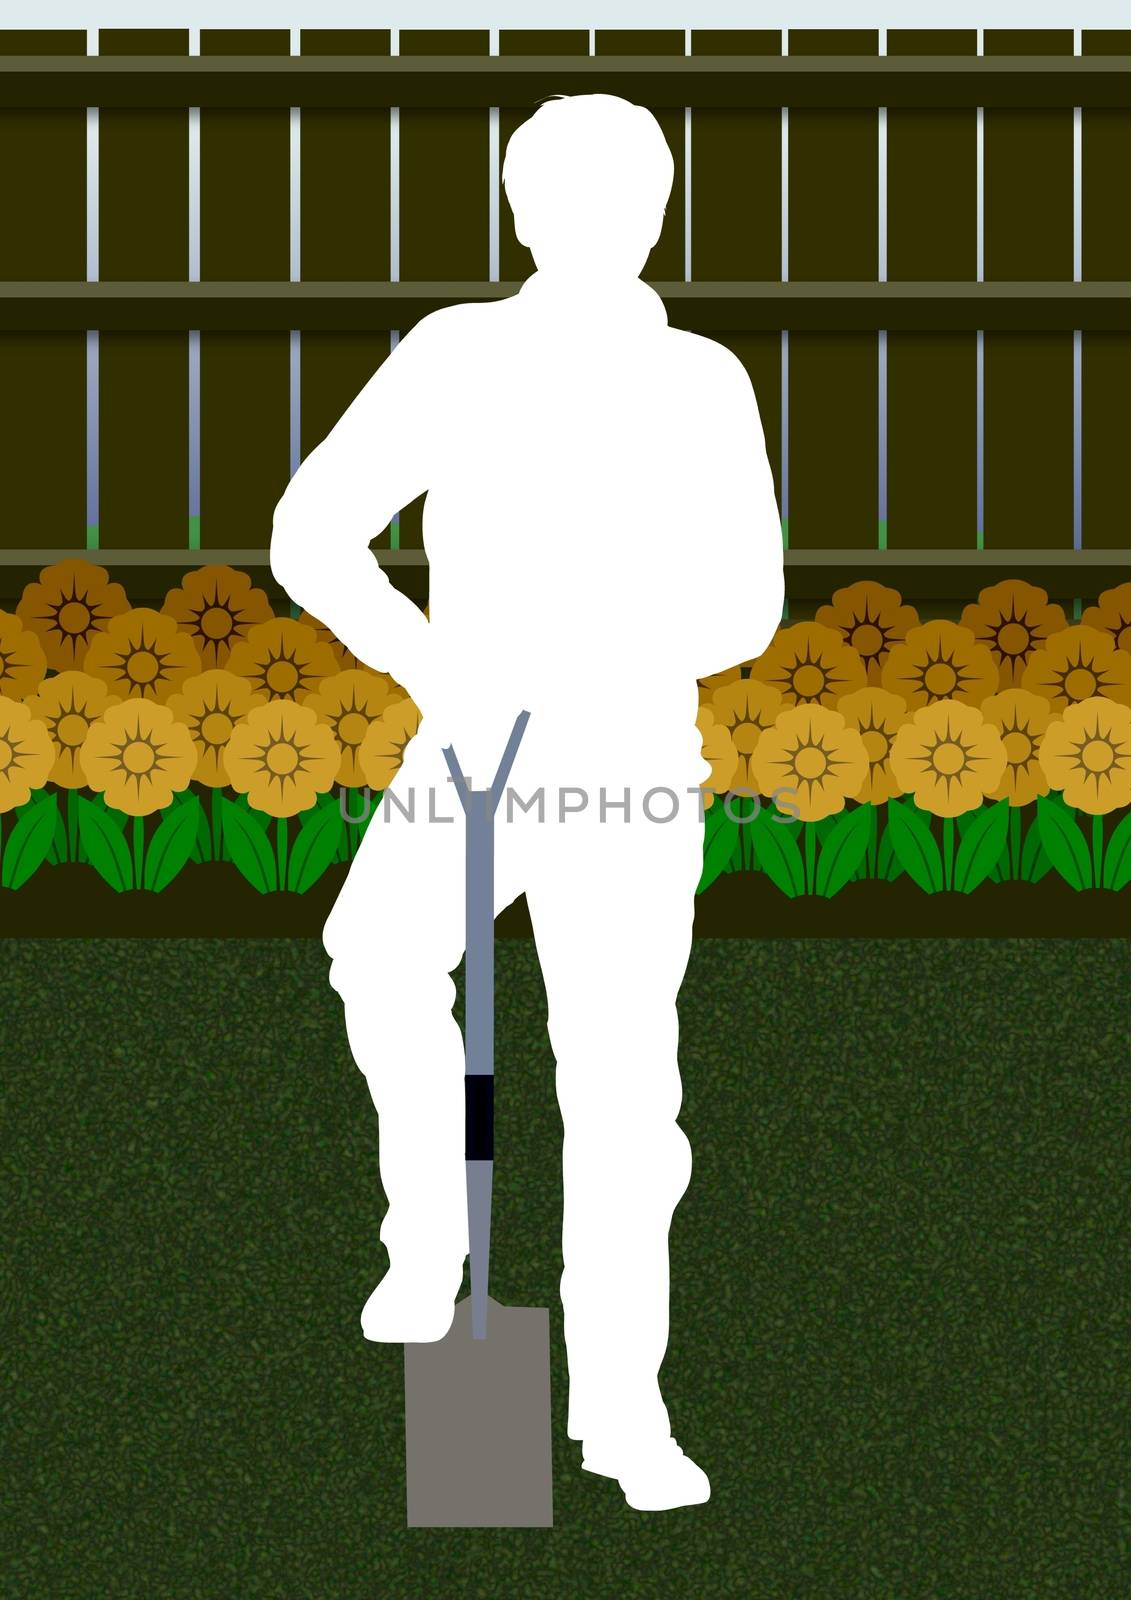 Illustration of a silhouette person gardening